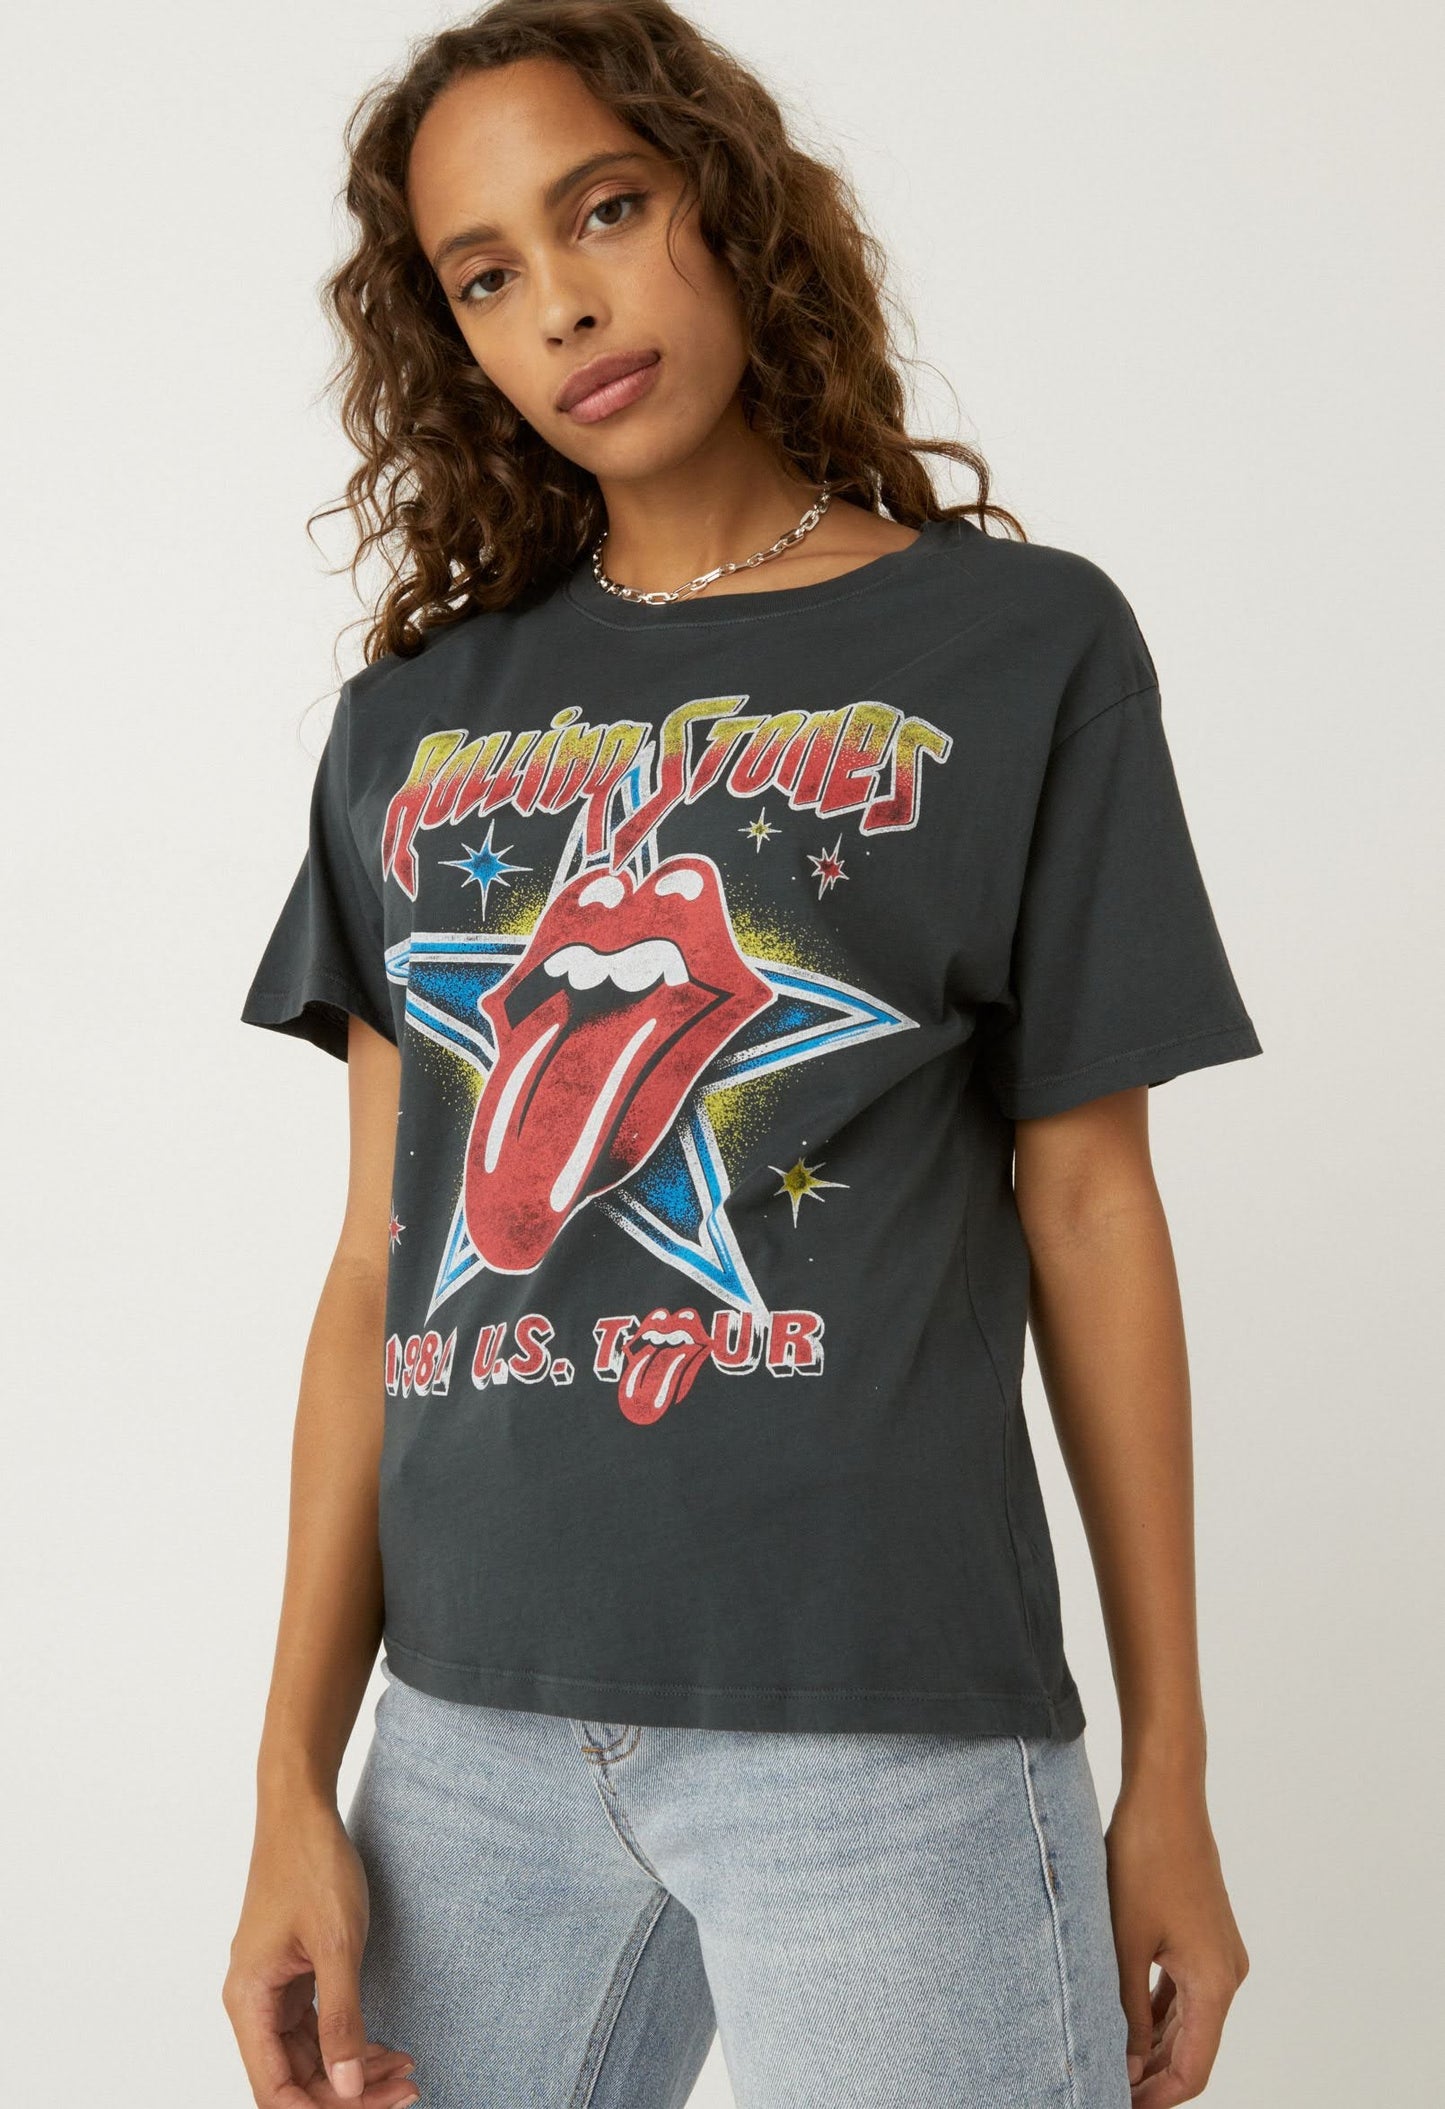 Daydreamer Rolling Stones '81 Tour Tee